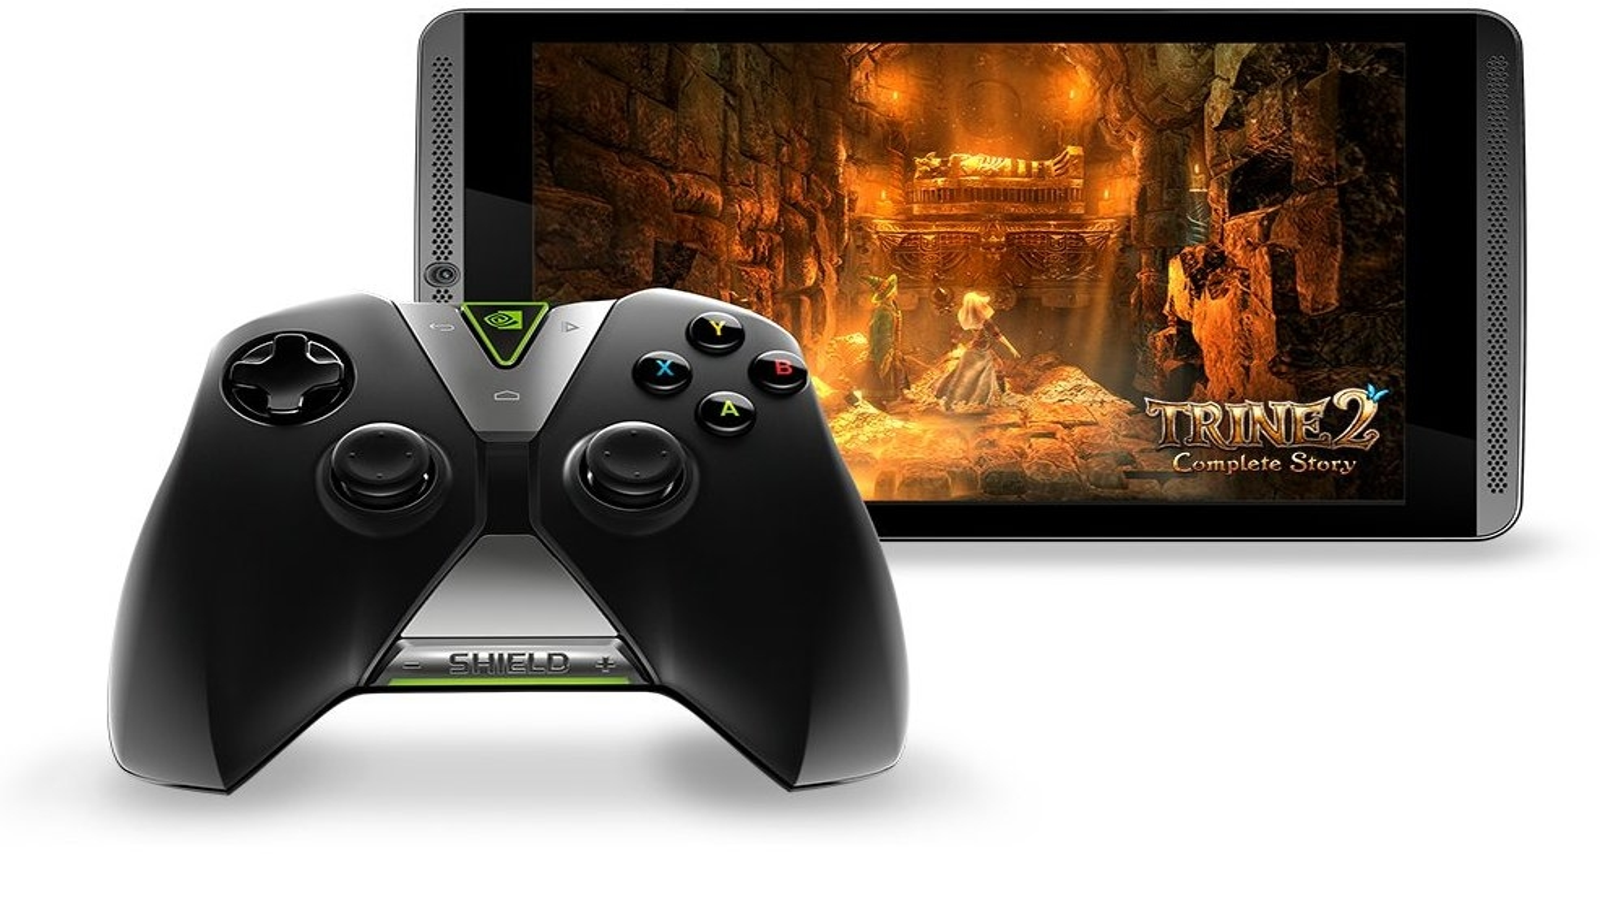 Nvidia Shield Tablet review: An Android gaming tablet with benefits - CNET